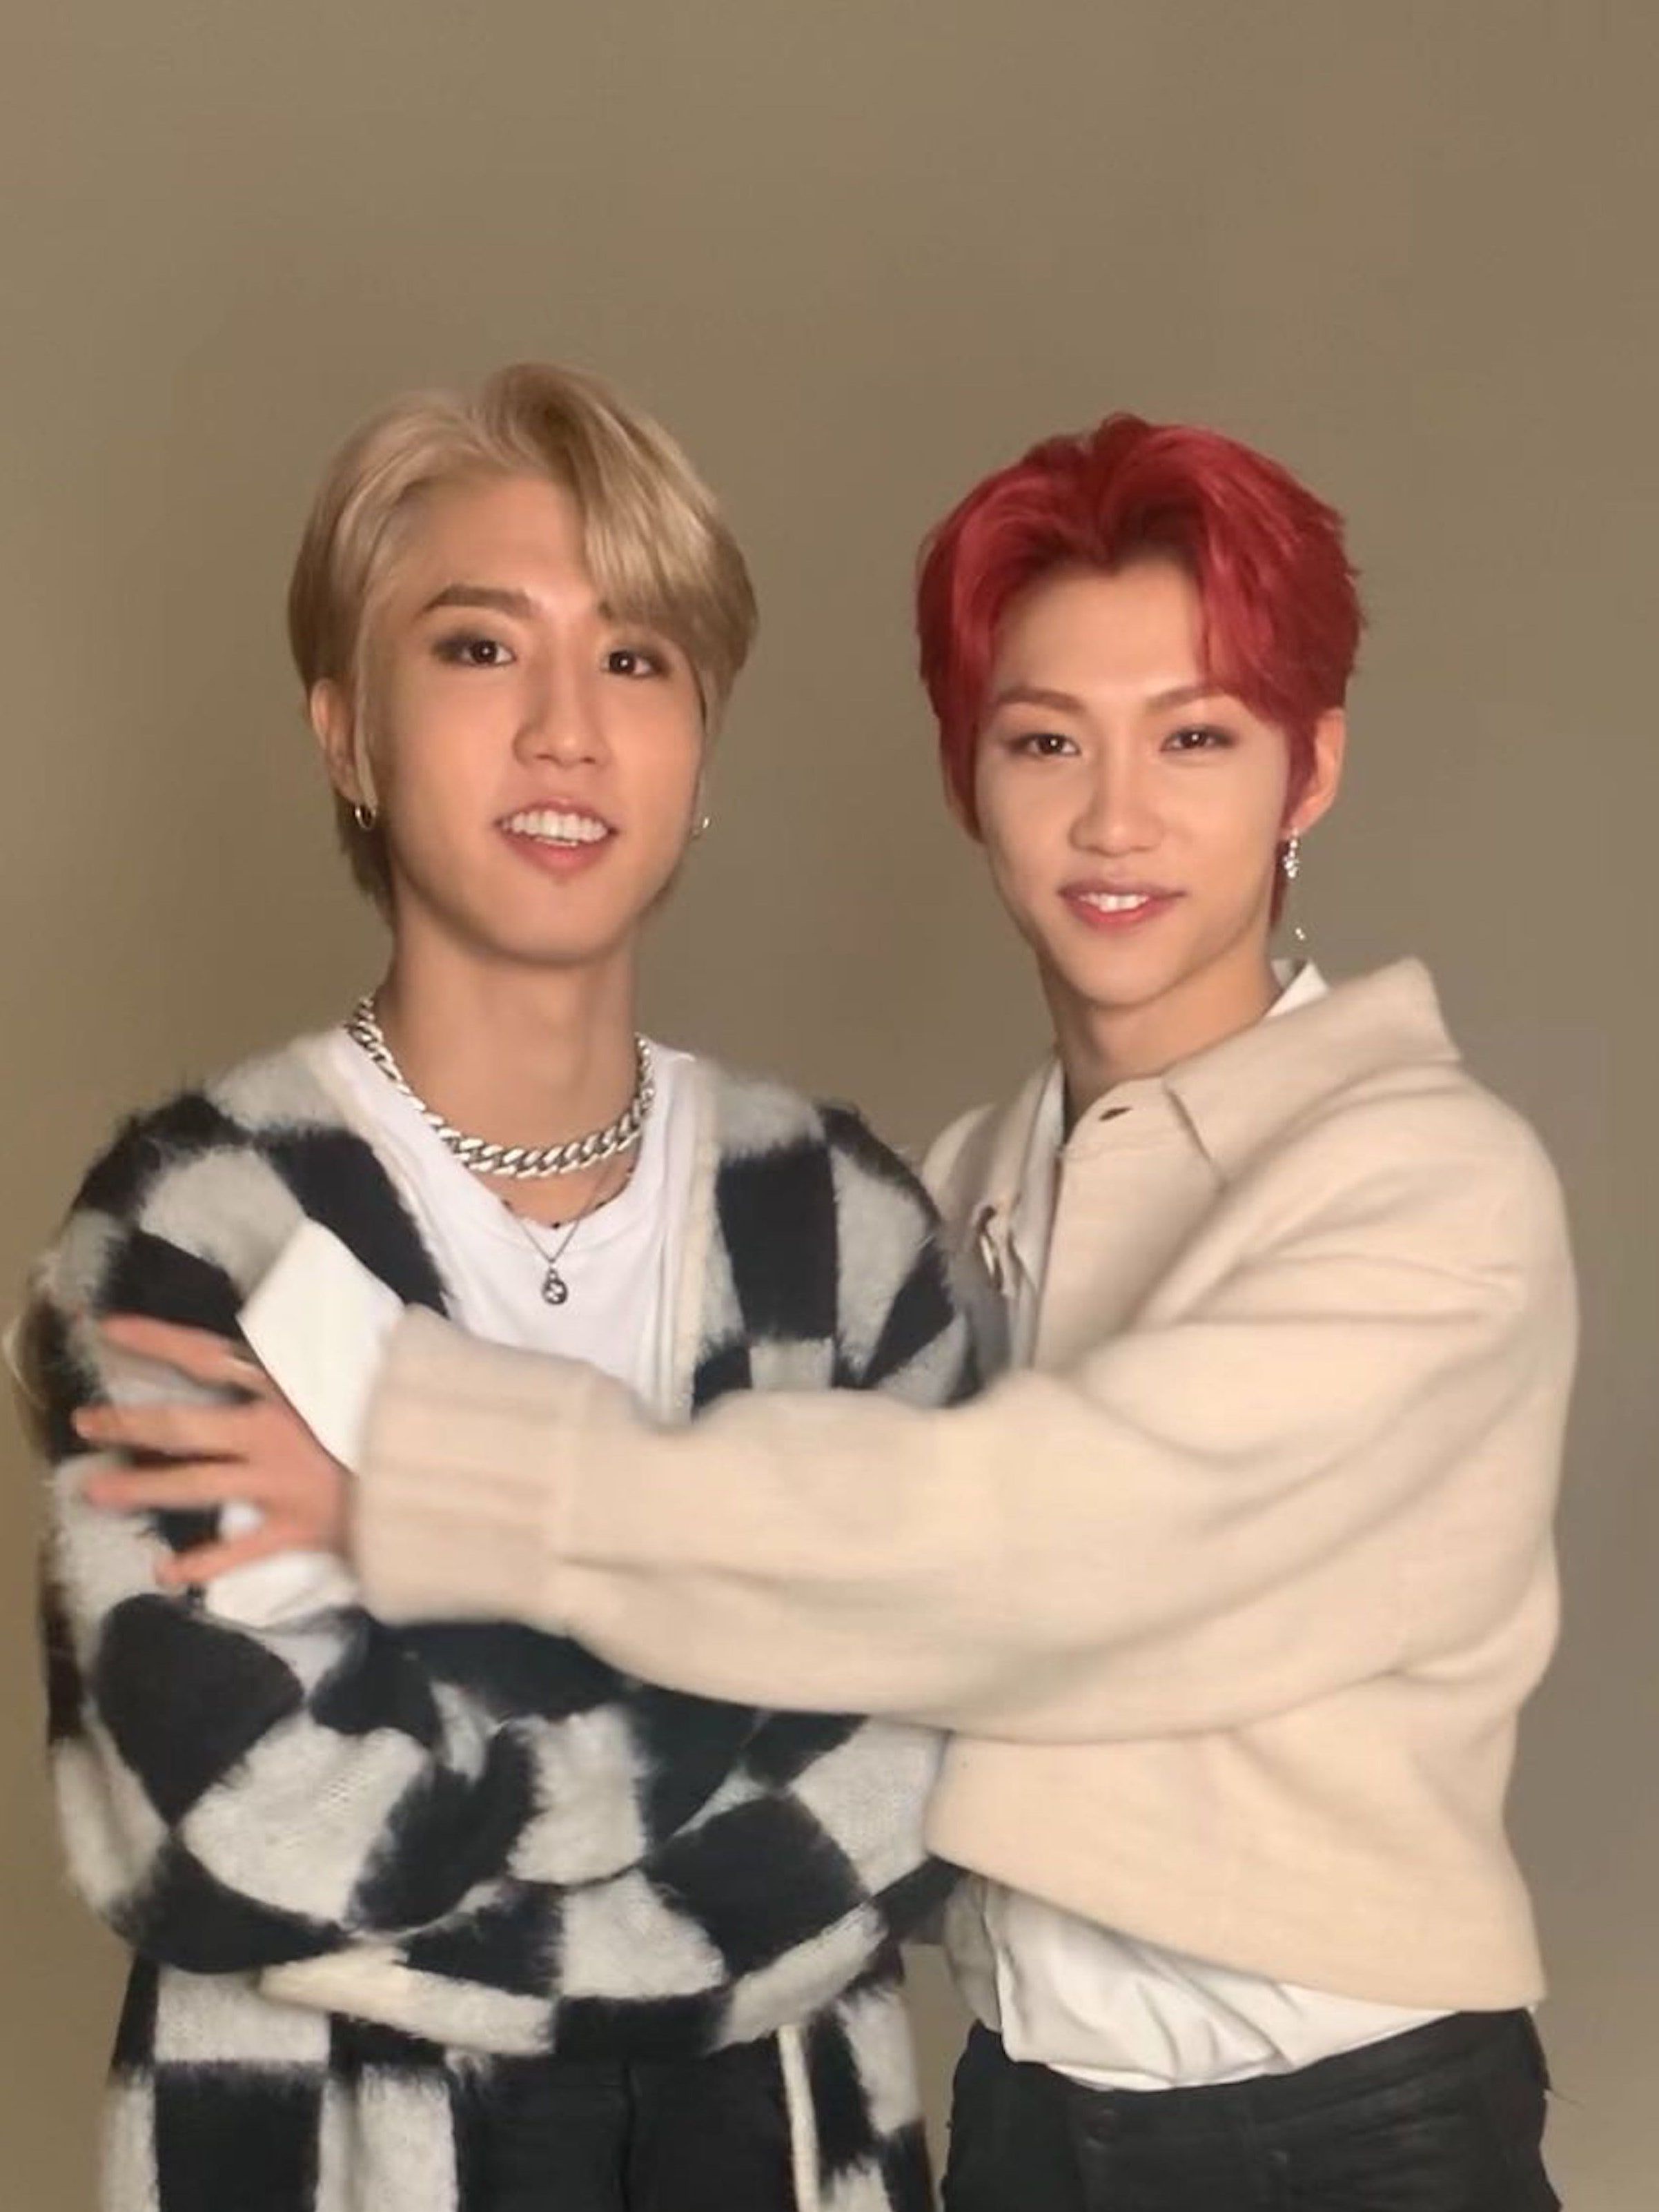 K Pop's Han And Felix Of Stray Kids Share Their Skin Care Routines